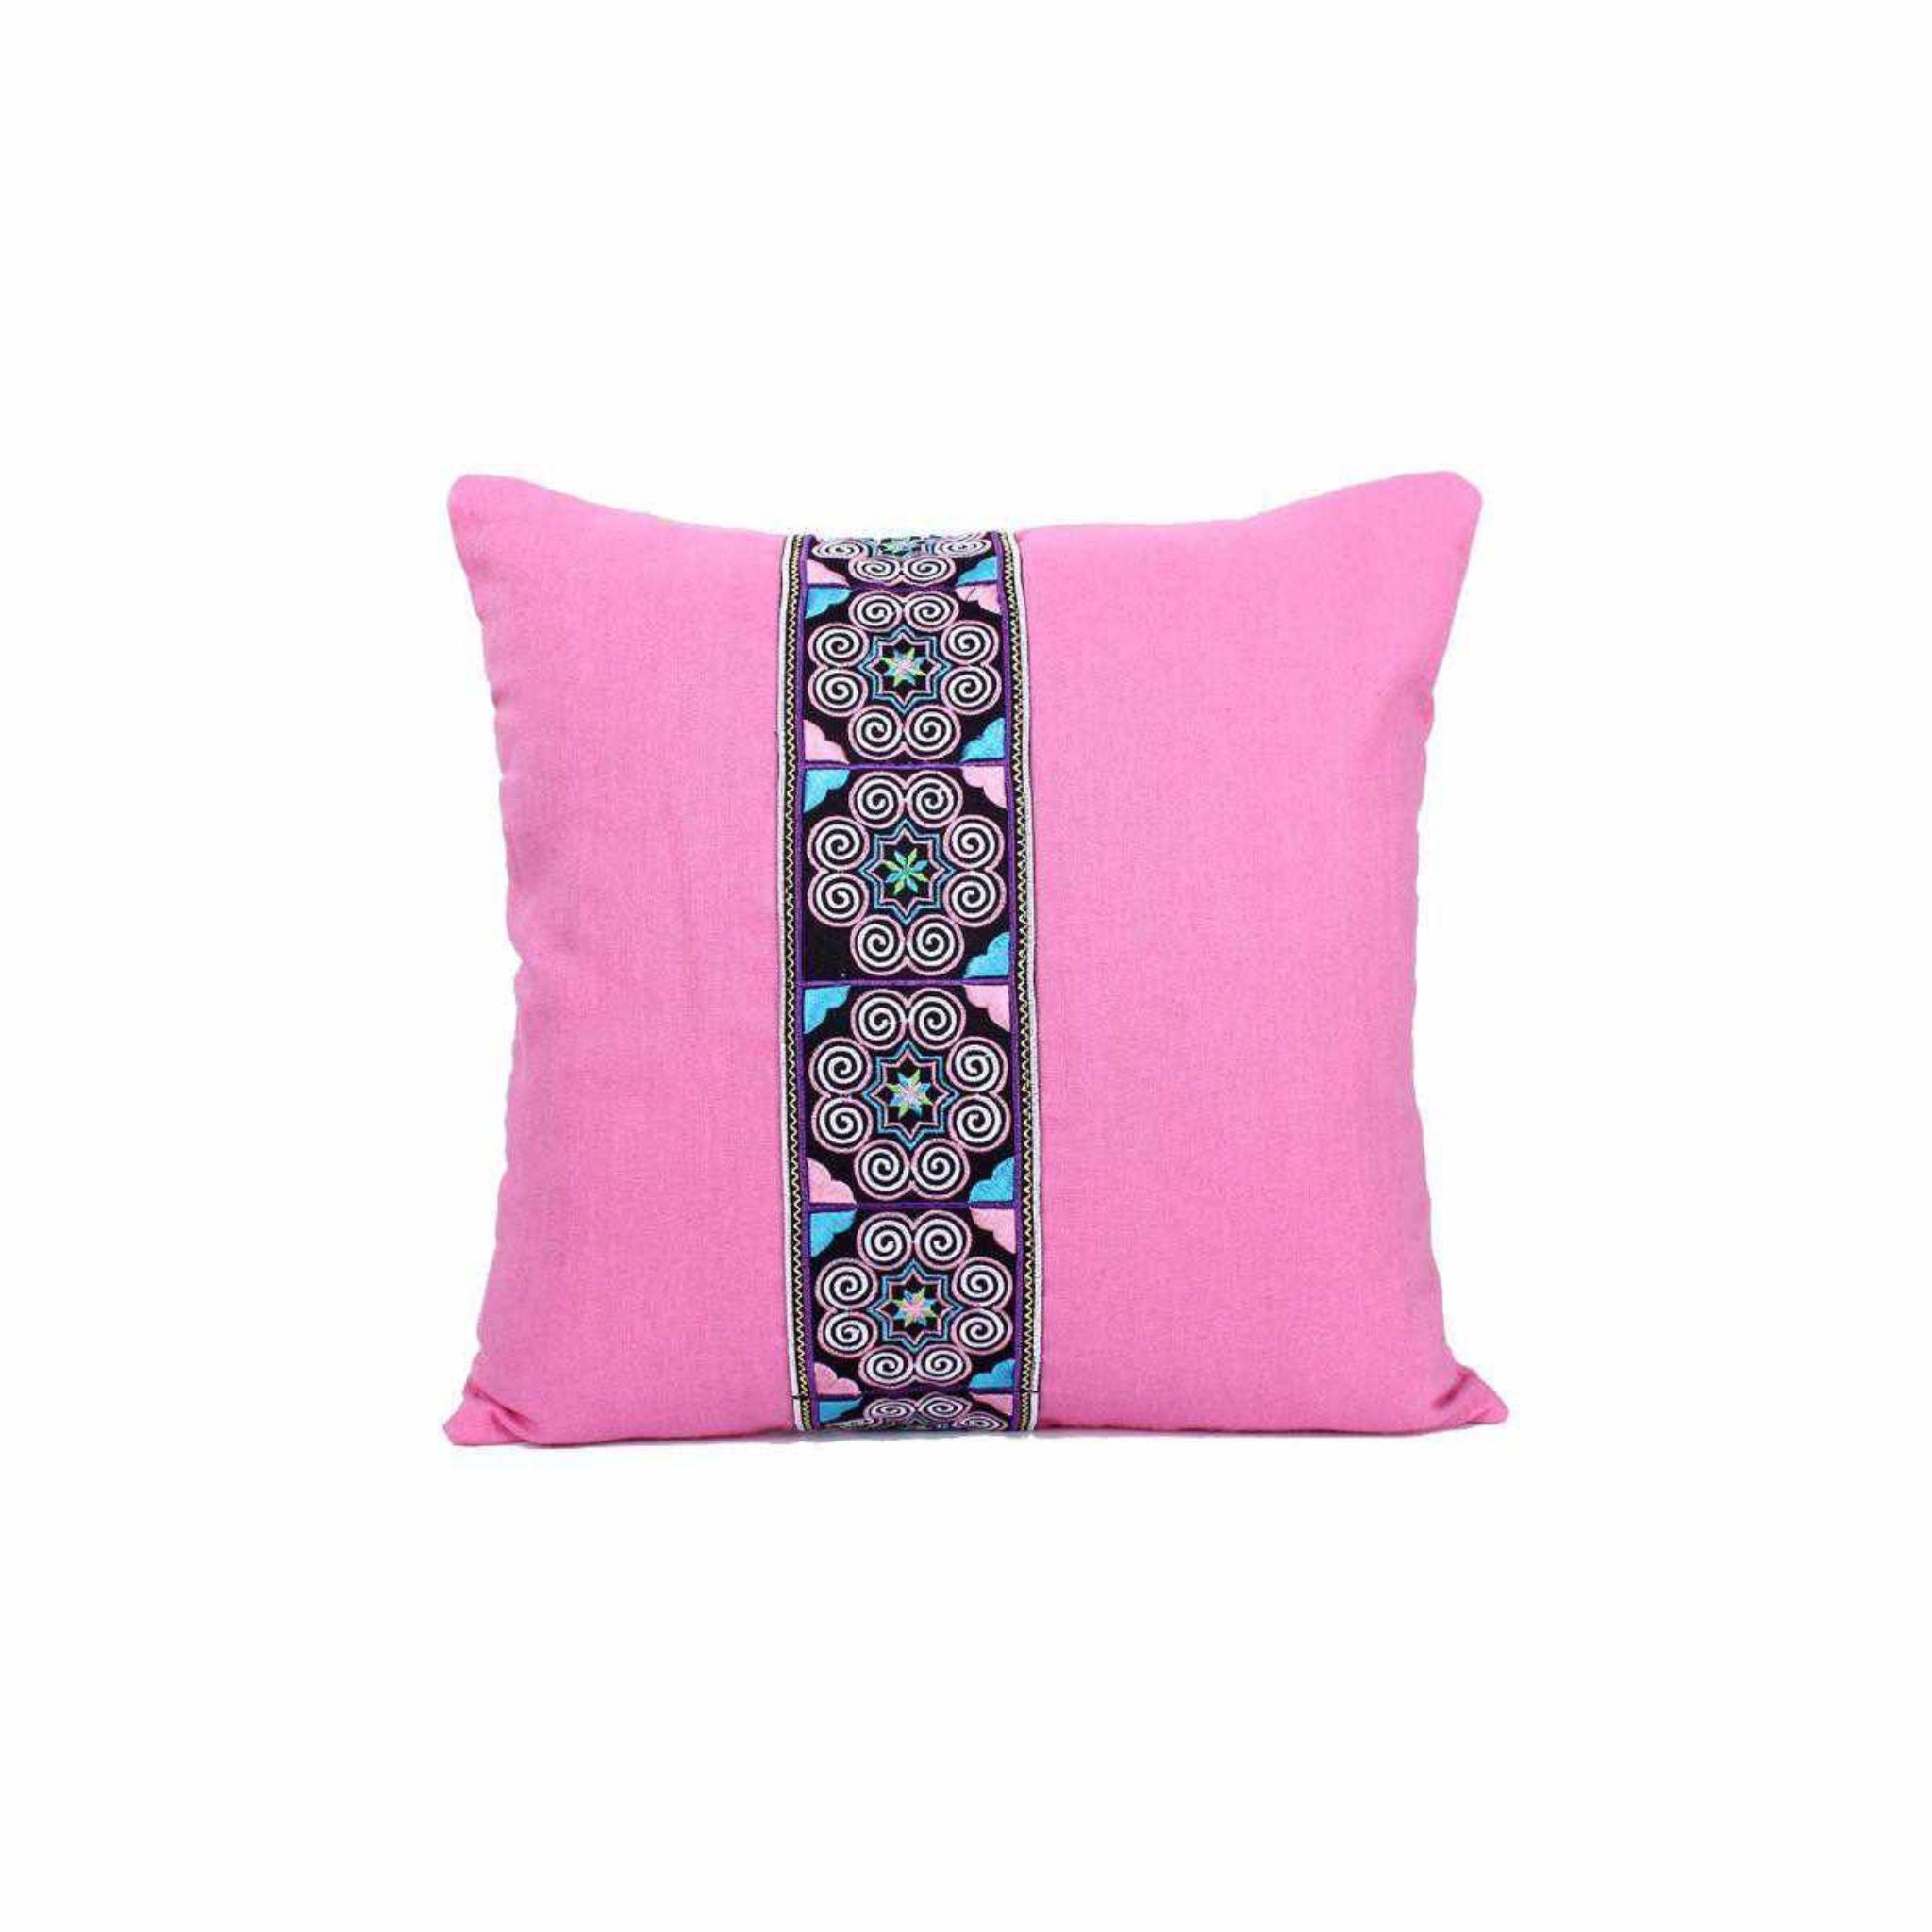 Cushion Covers from Thailand